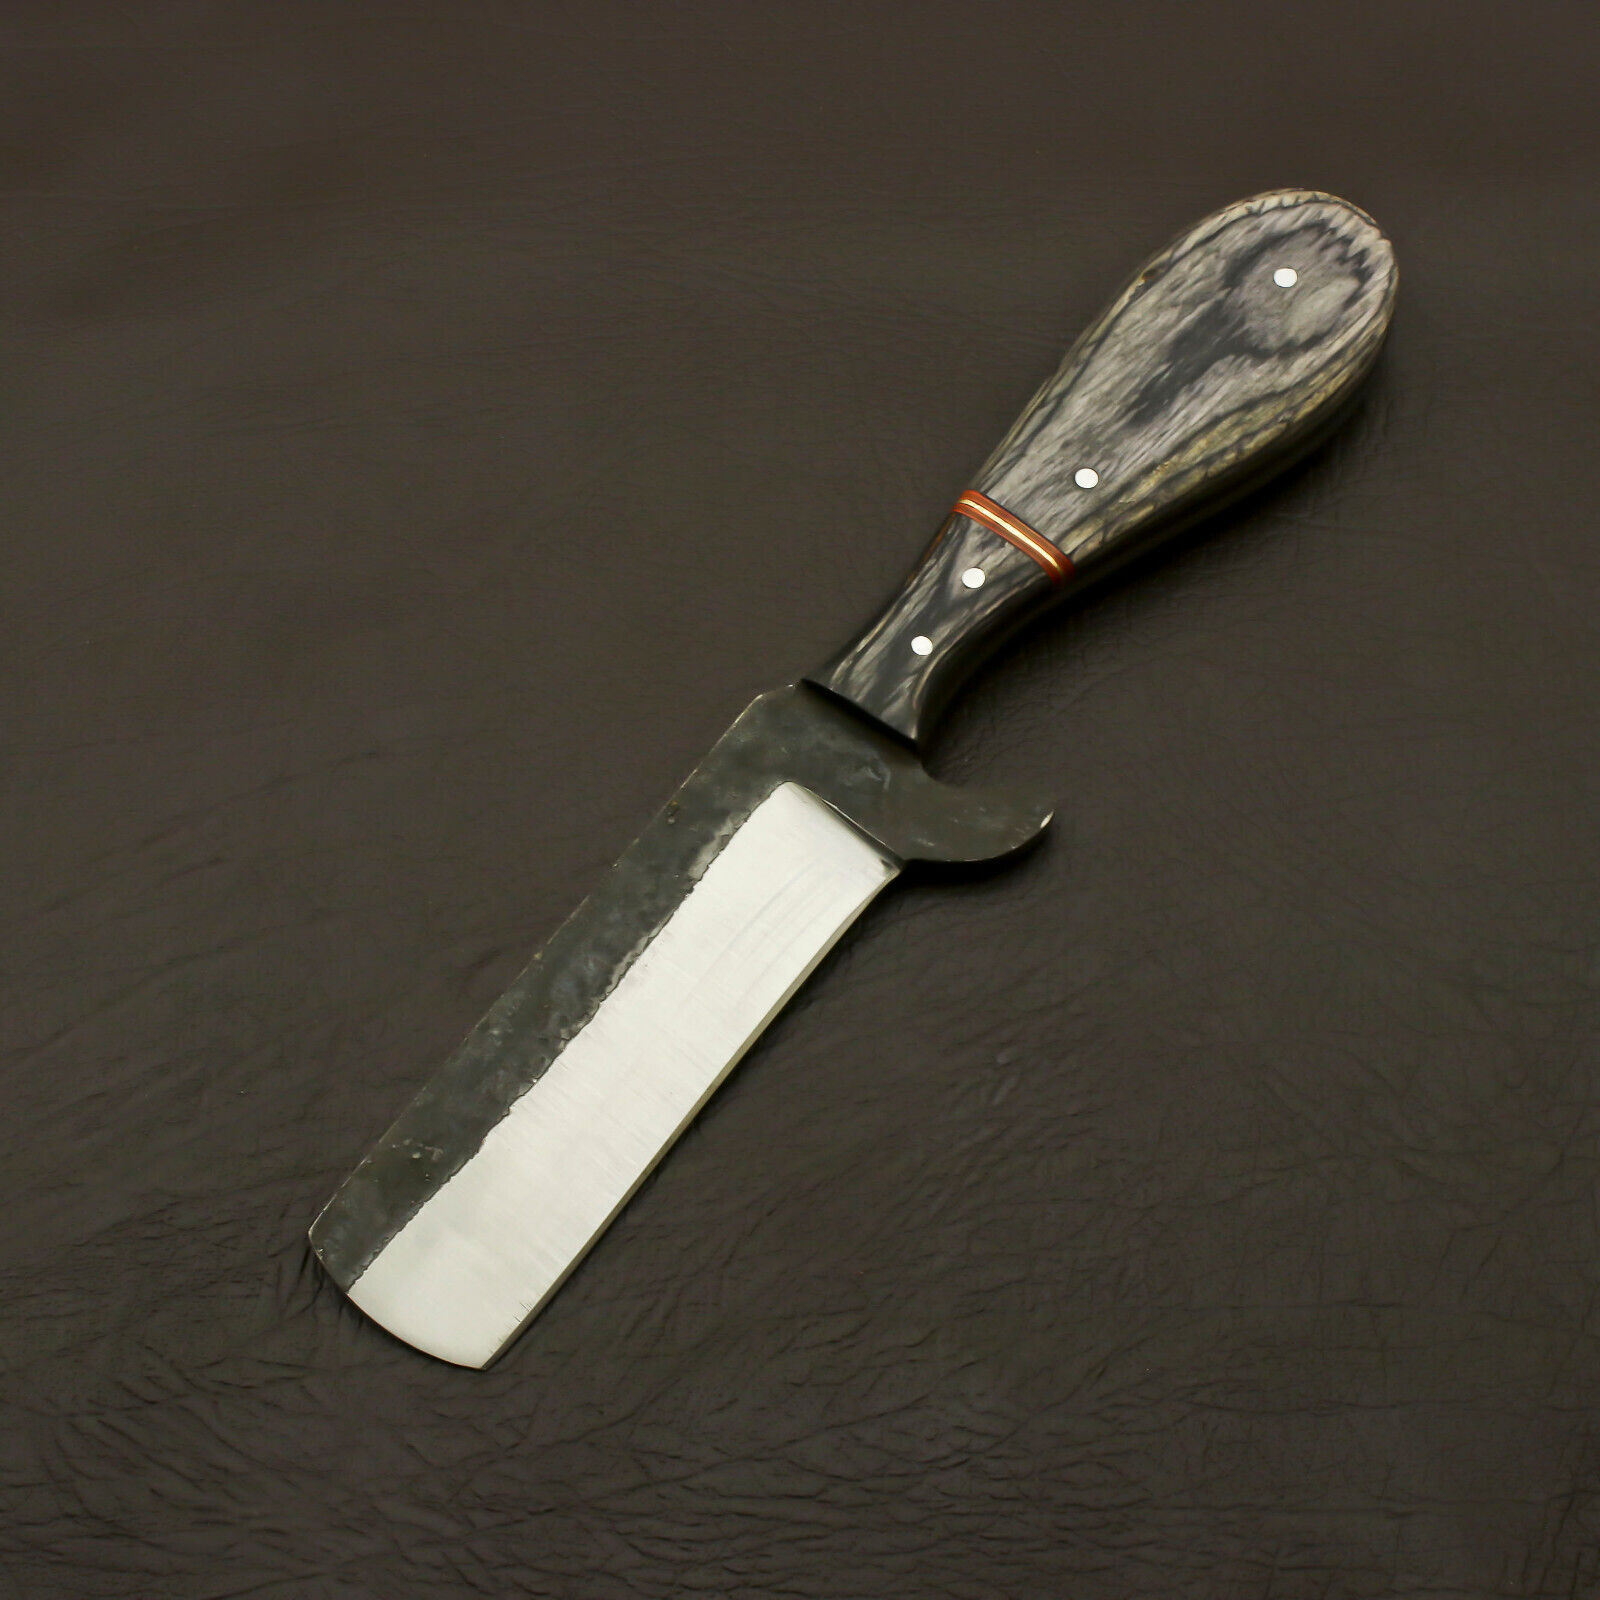 Superb looking Custom hand Forged Railroad Spike Carbon Steel Fixed Blade Knife